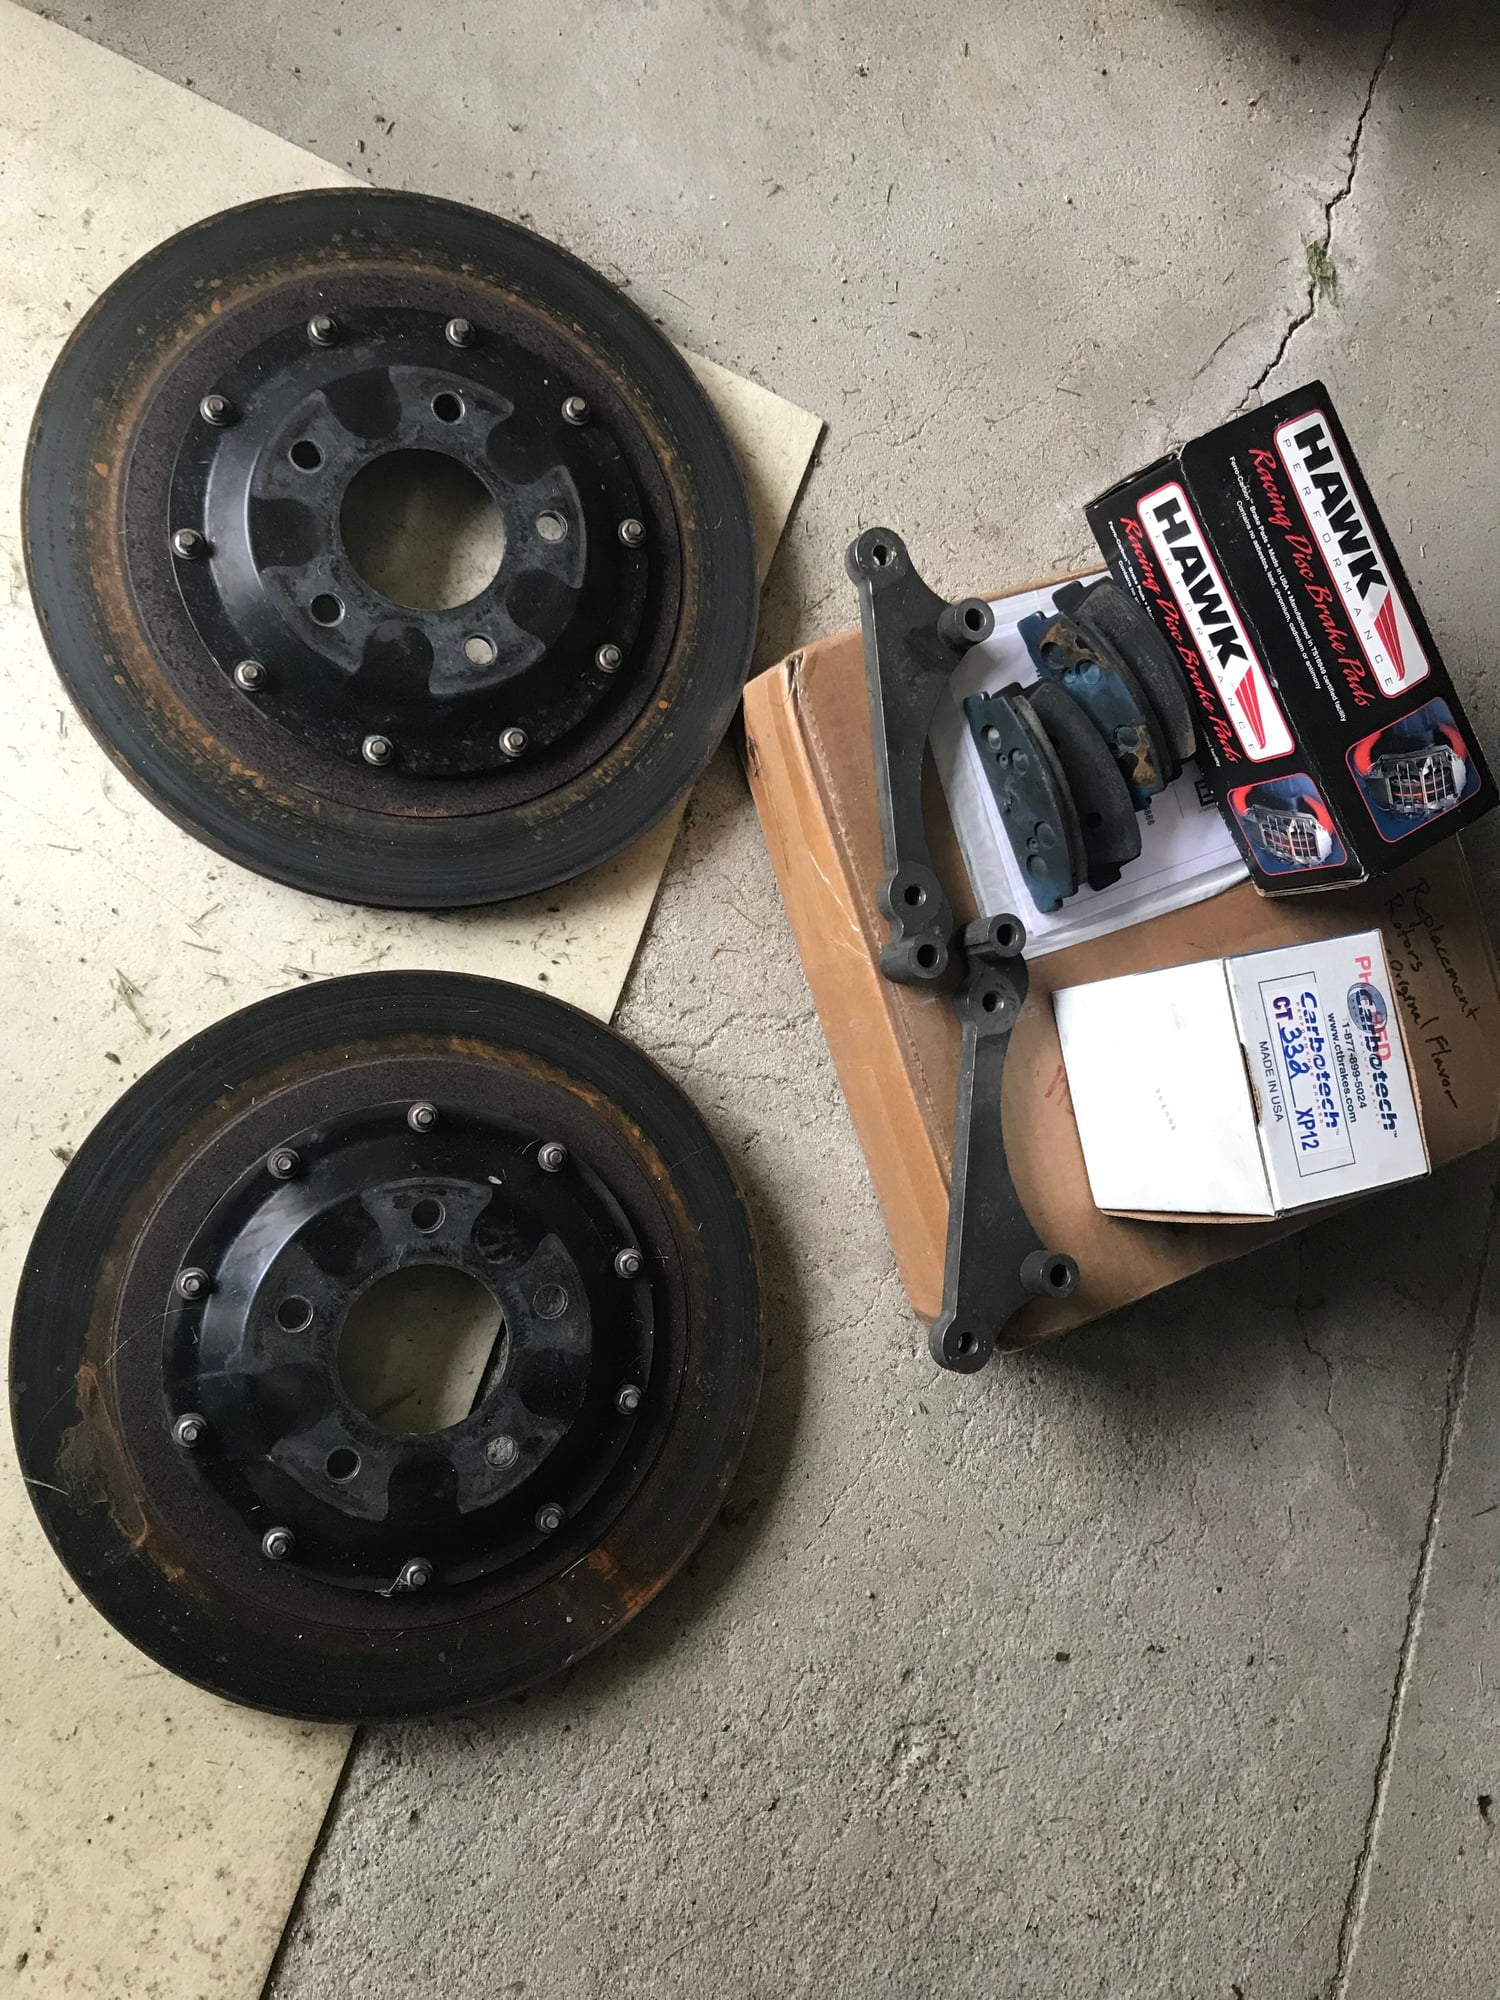 1993 Mazda RX-7 - SBG competition rear kit - Brakes - $800 - Mount Pleasant, PA 15666, United States